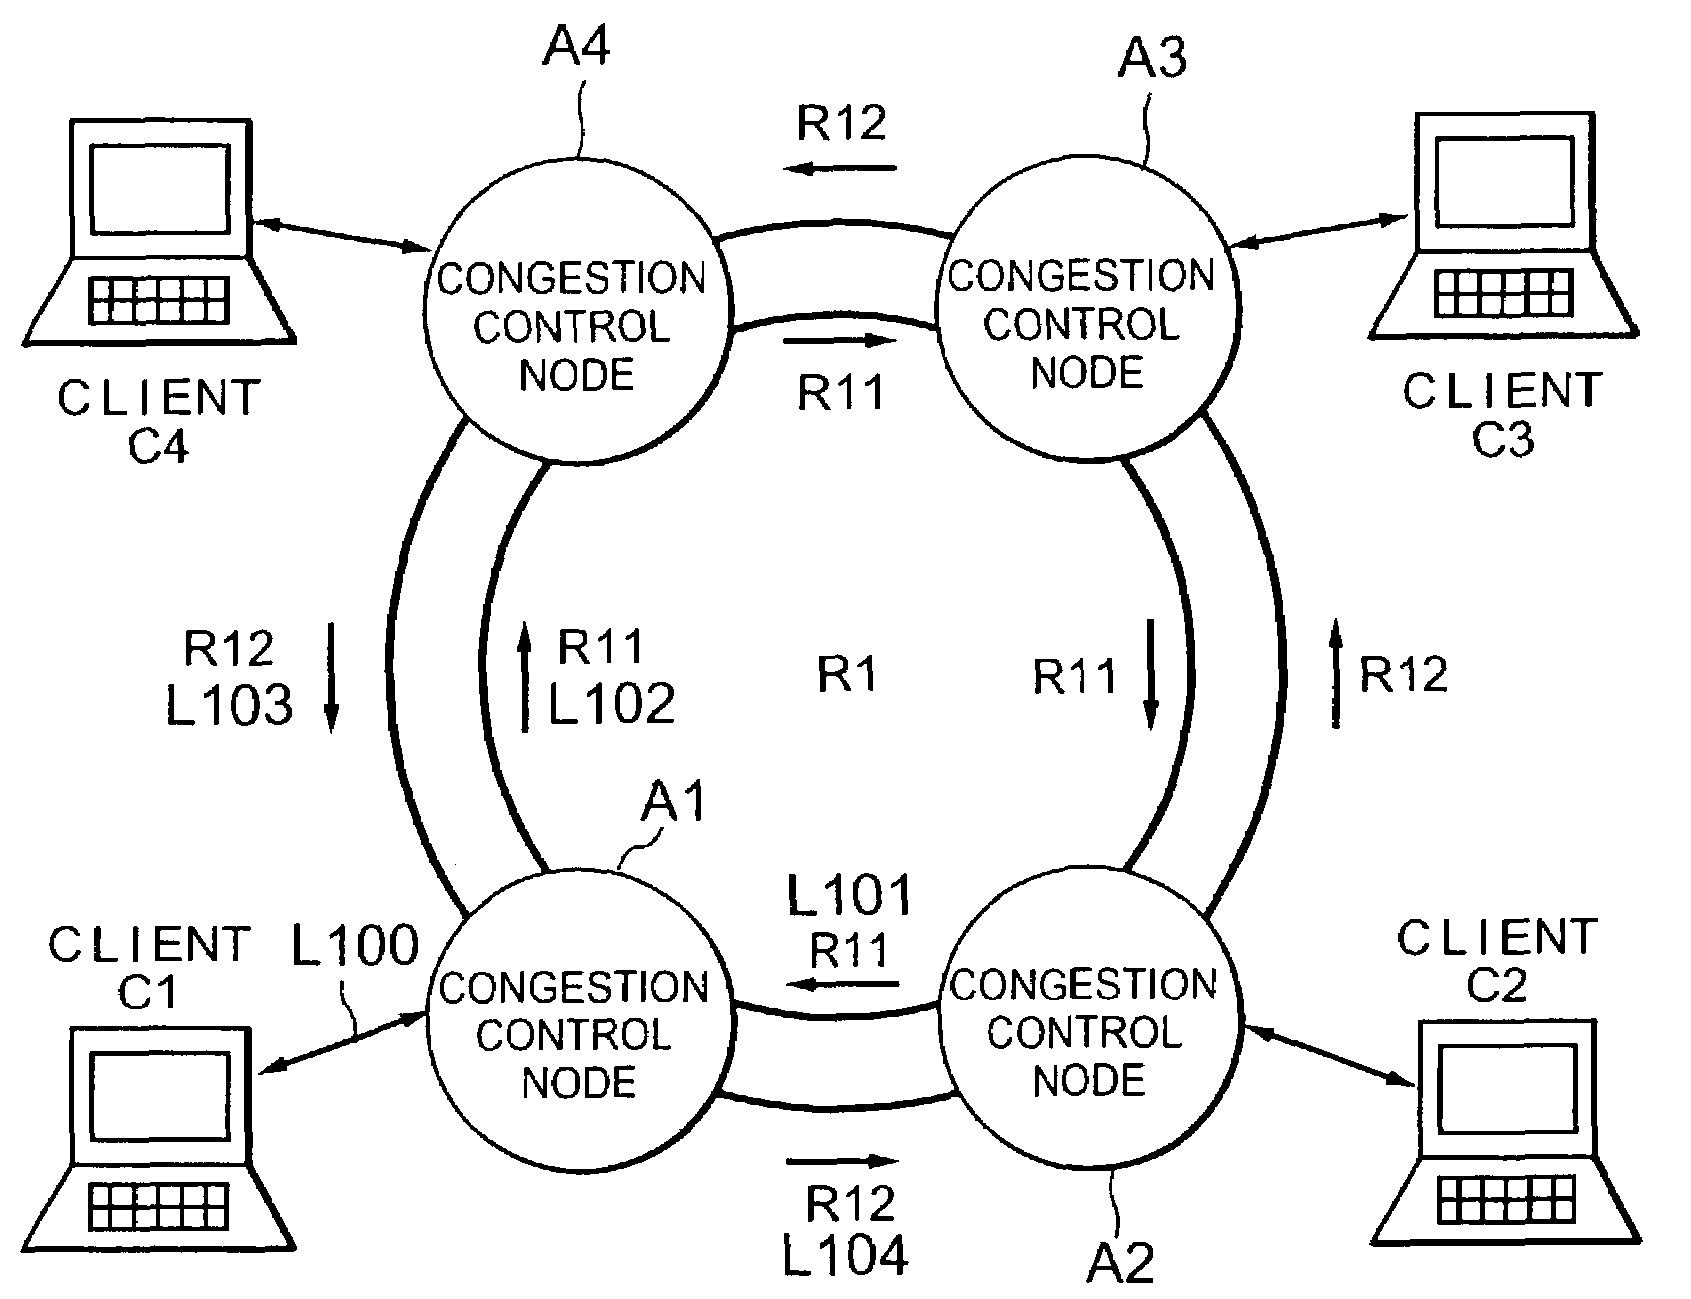 Congestion control for communication